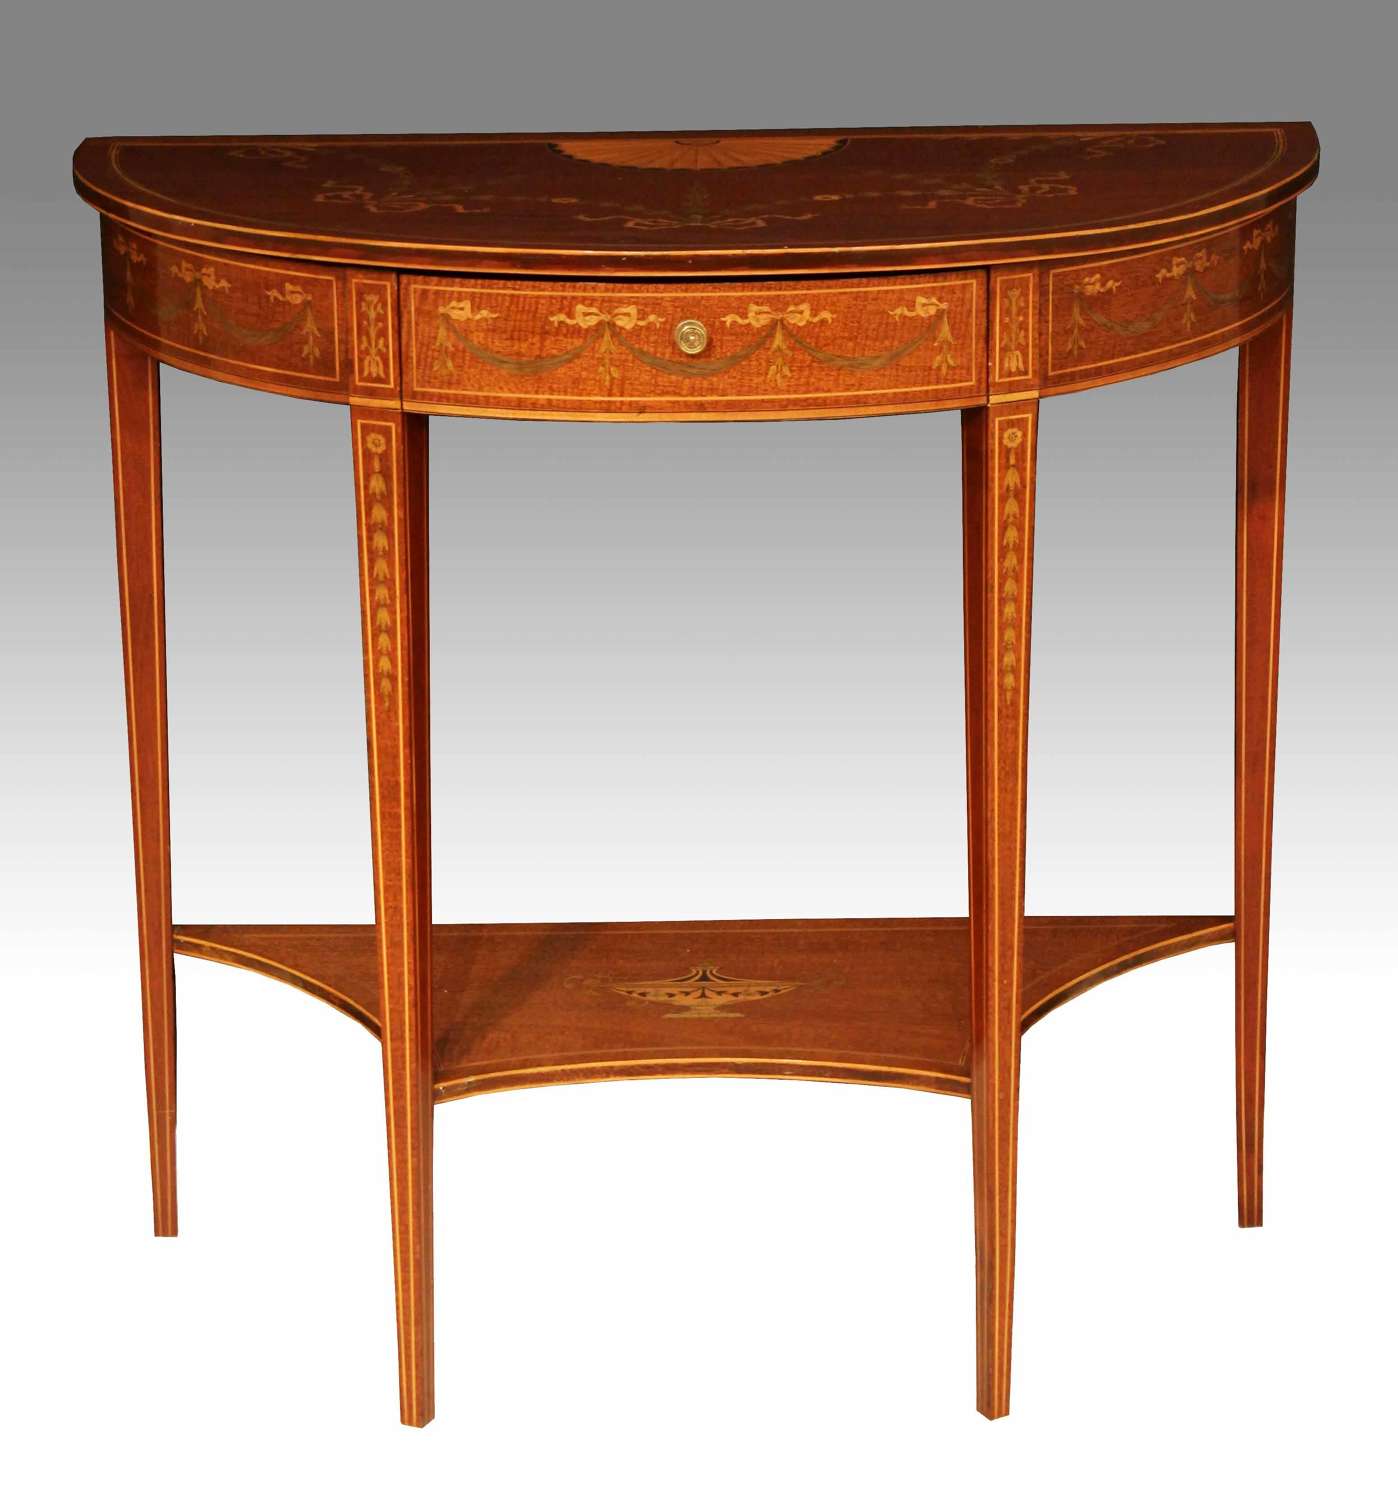 A Late Victorian Mahogany Inlaid Demilune Side Table